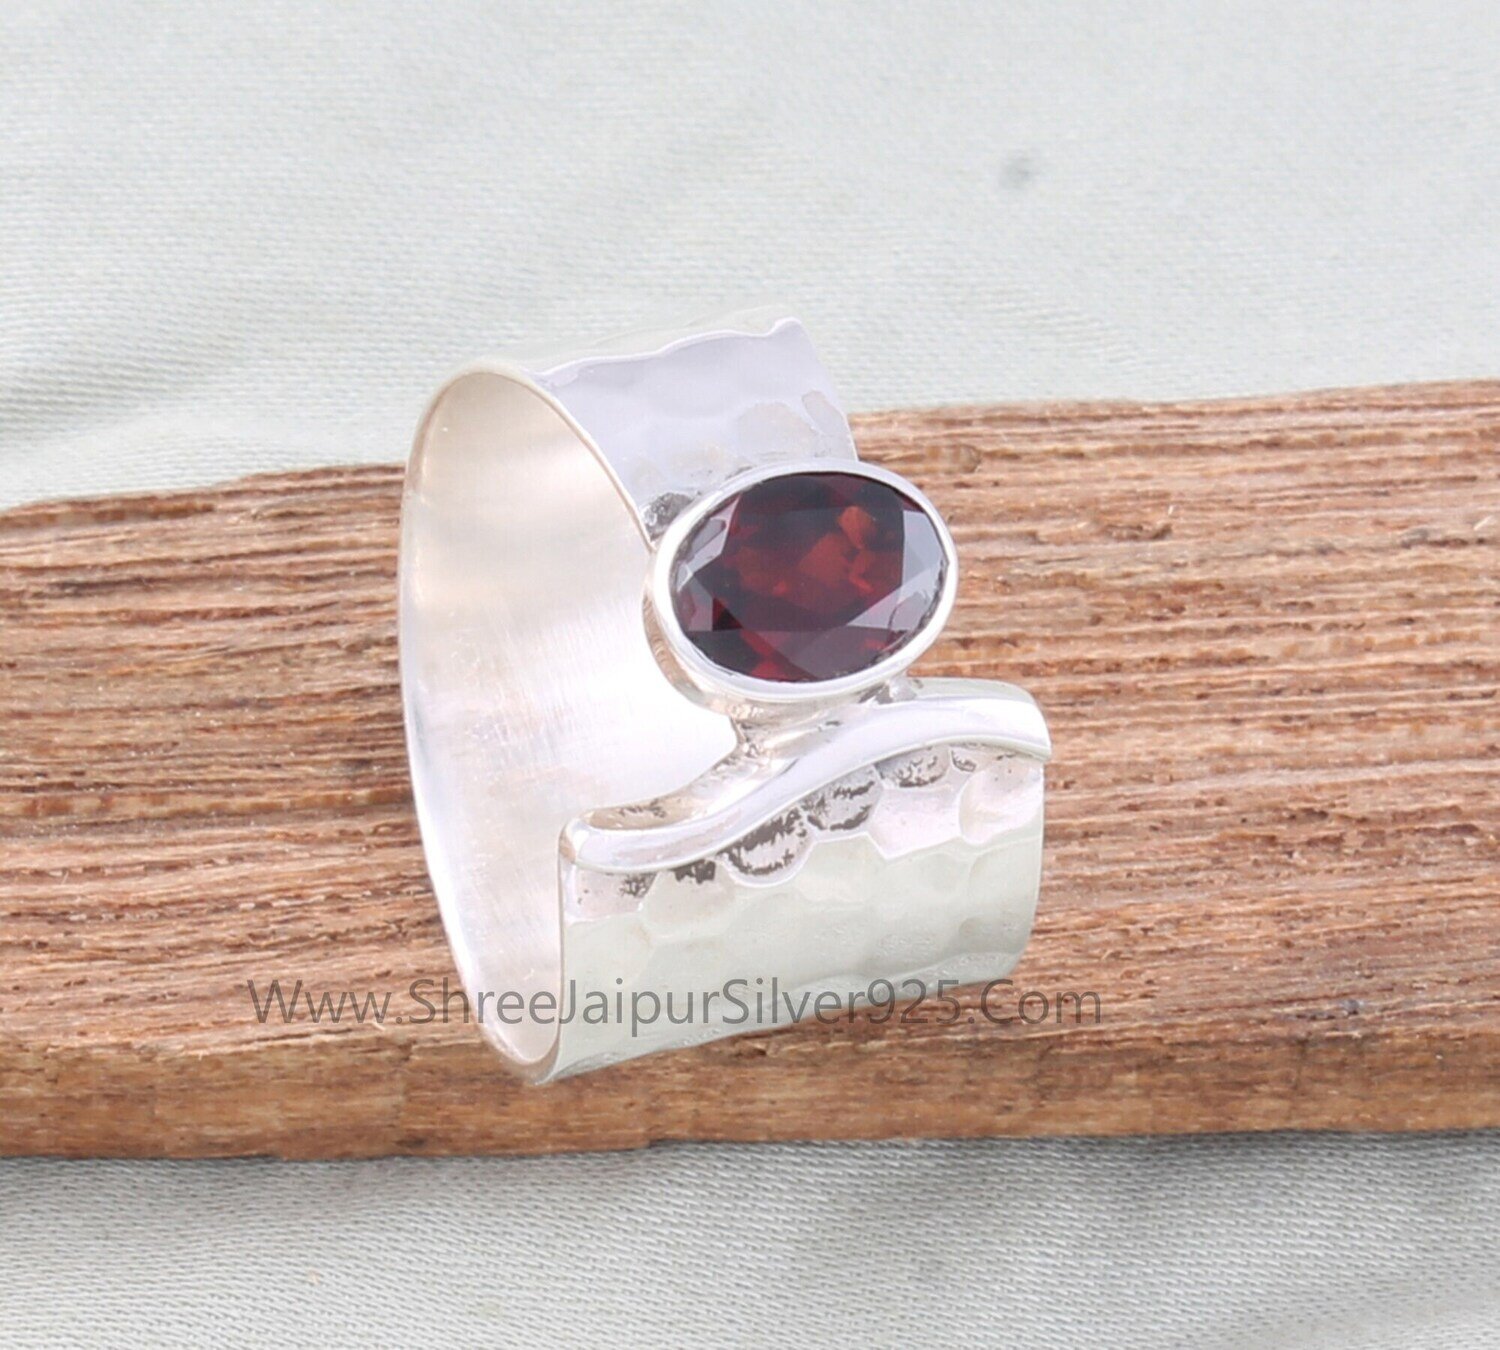 Natural Garnet Oval Cut Solid 925 Sterling Silver Ring For Women Handmade Silver Hammered Designer Fancy Band Ring Gifts Wedding Anniversary